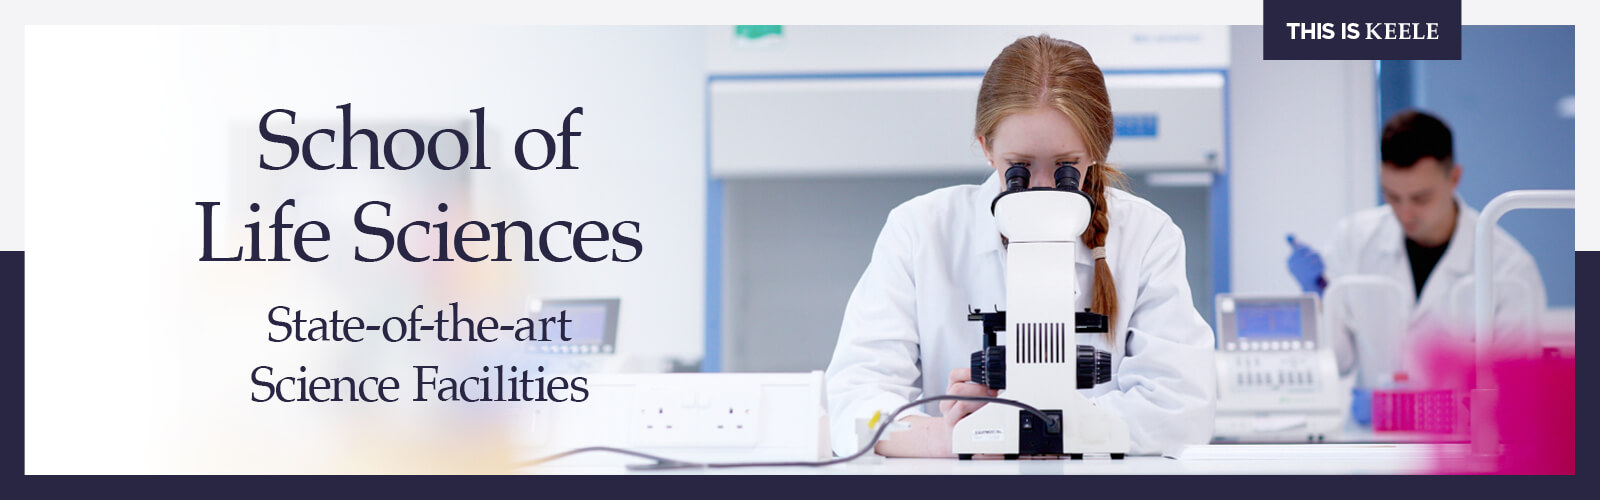 Research - Life Sciences